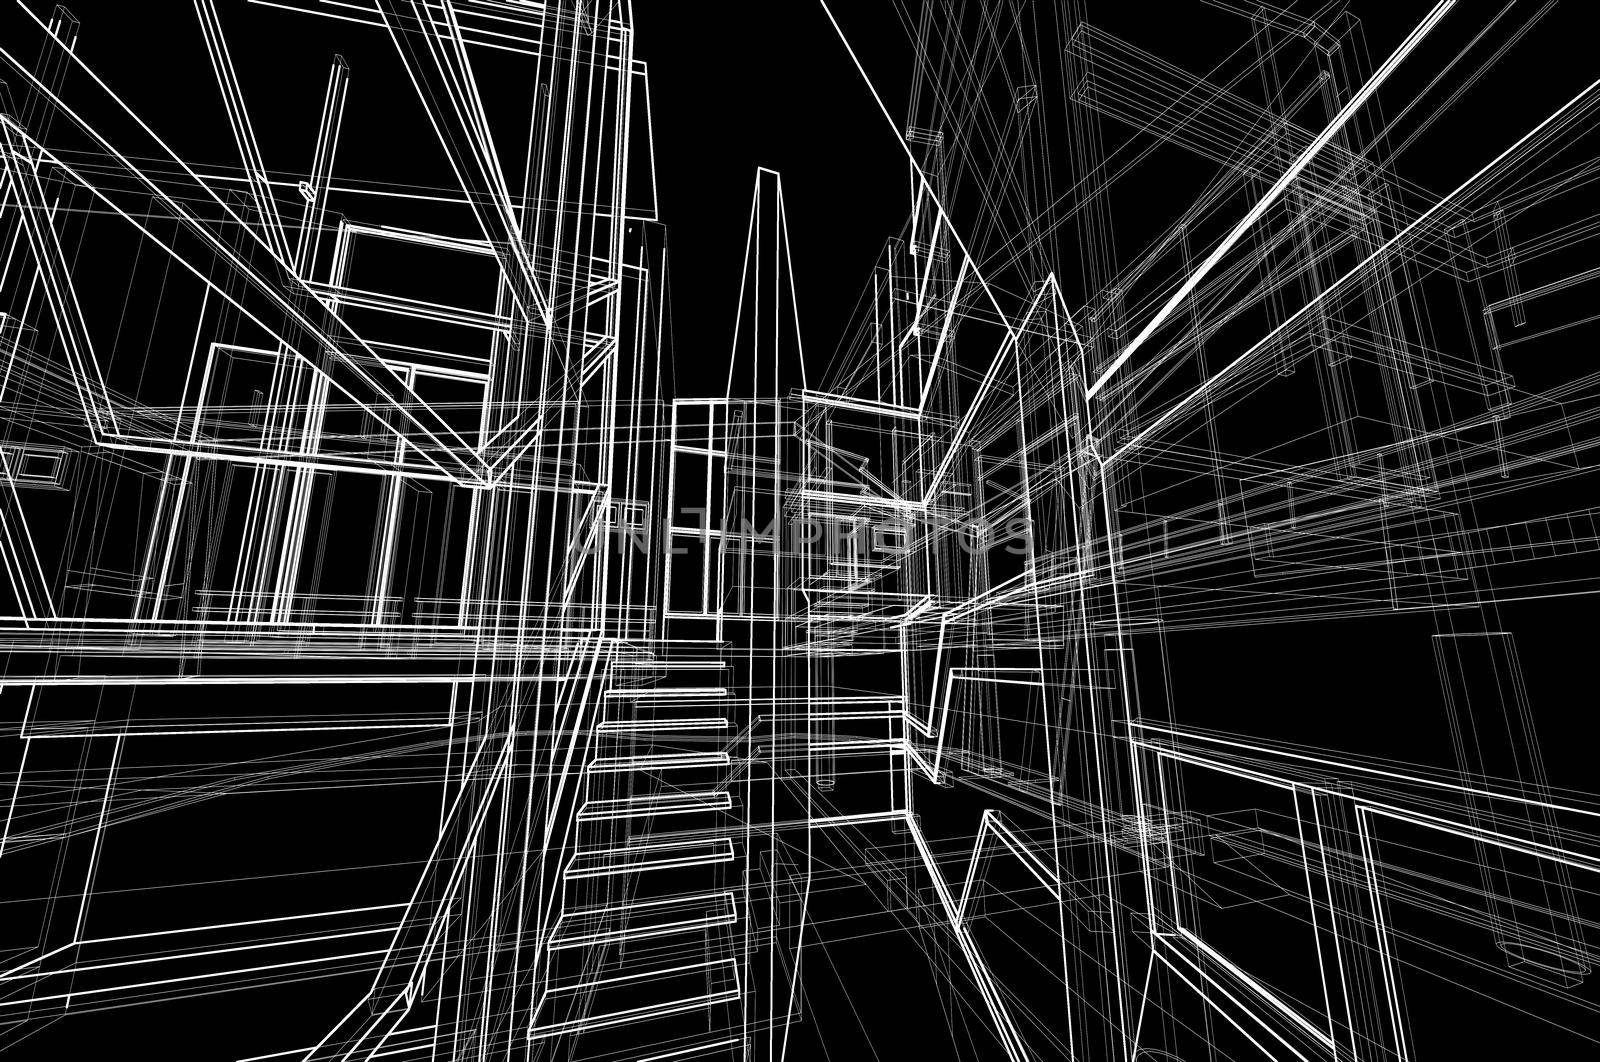 Architecture house space design concept 3d perspective white wireframe rendering isolated black background. For abstract background or wallpaper desktops computer technology design architectural theme